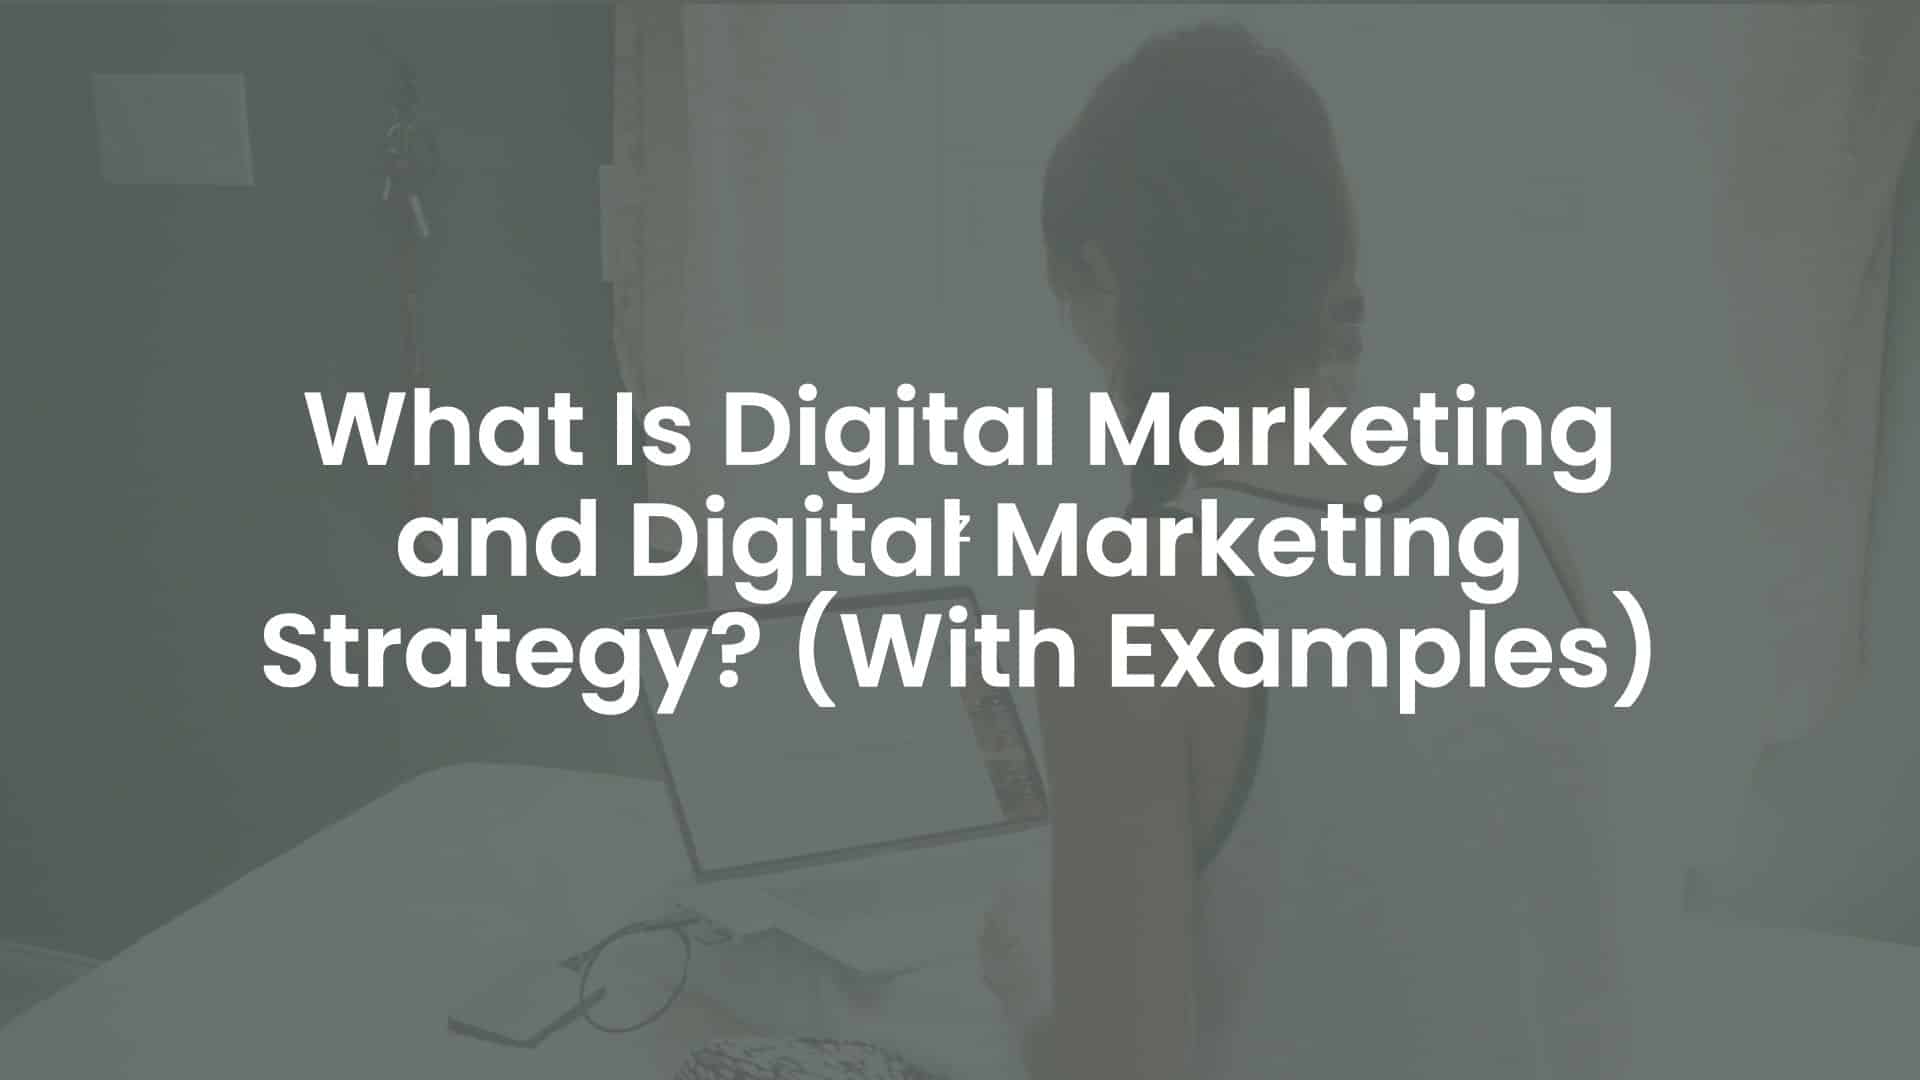 What is Digital Marketing and Digital Marketing Strategy? (With Examples)